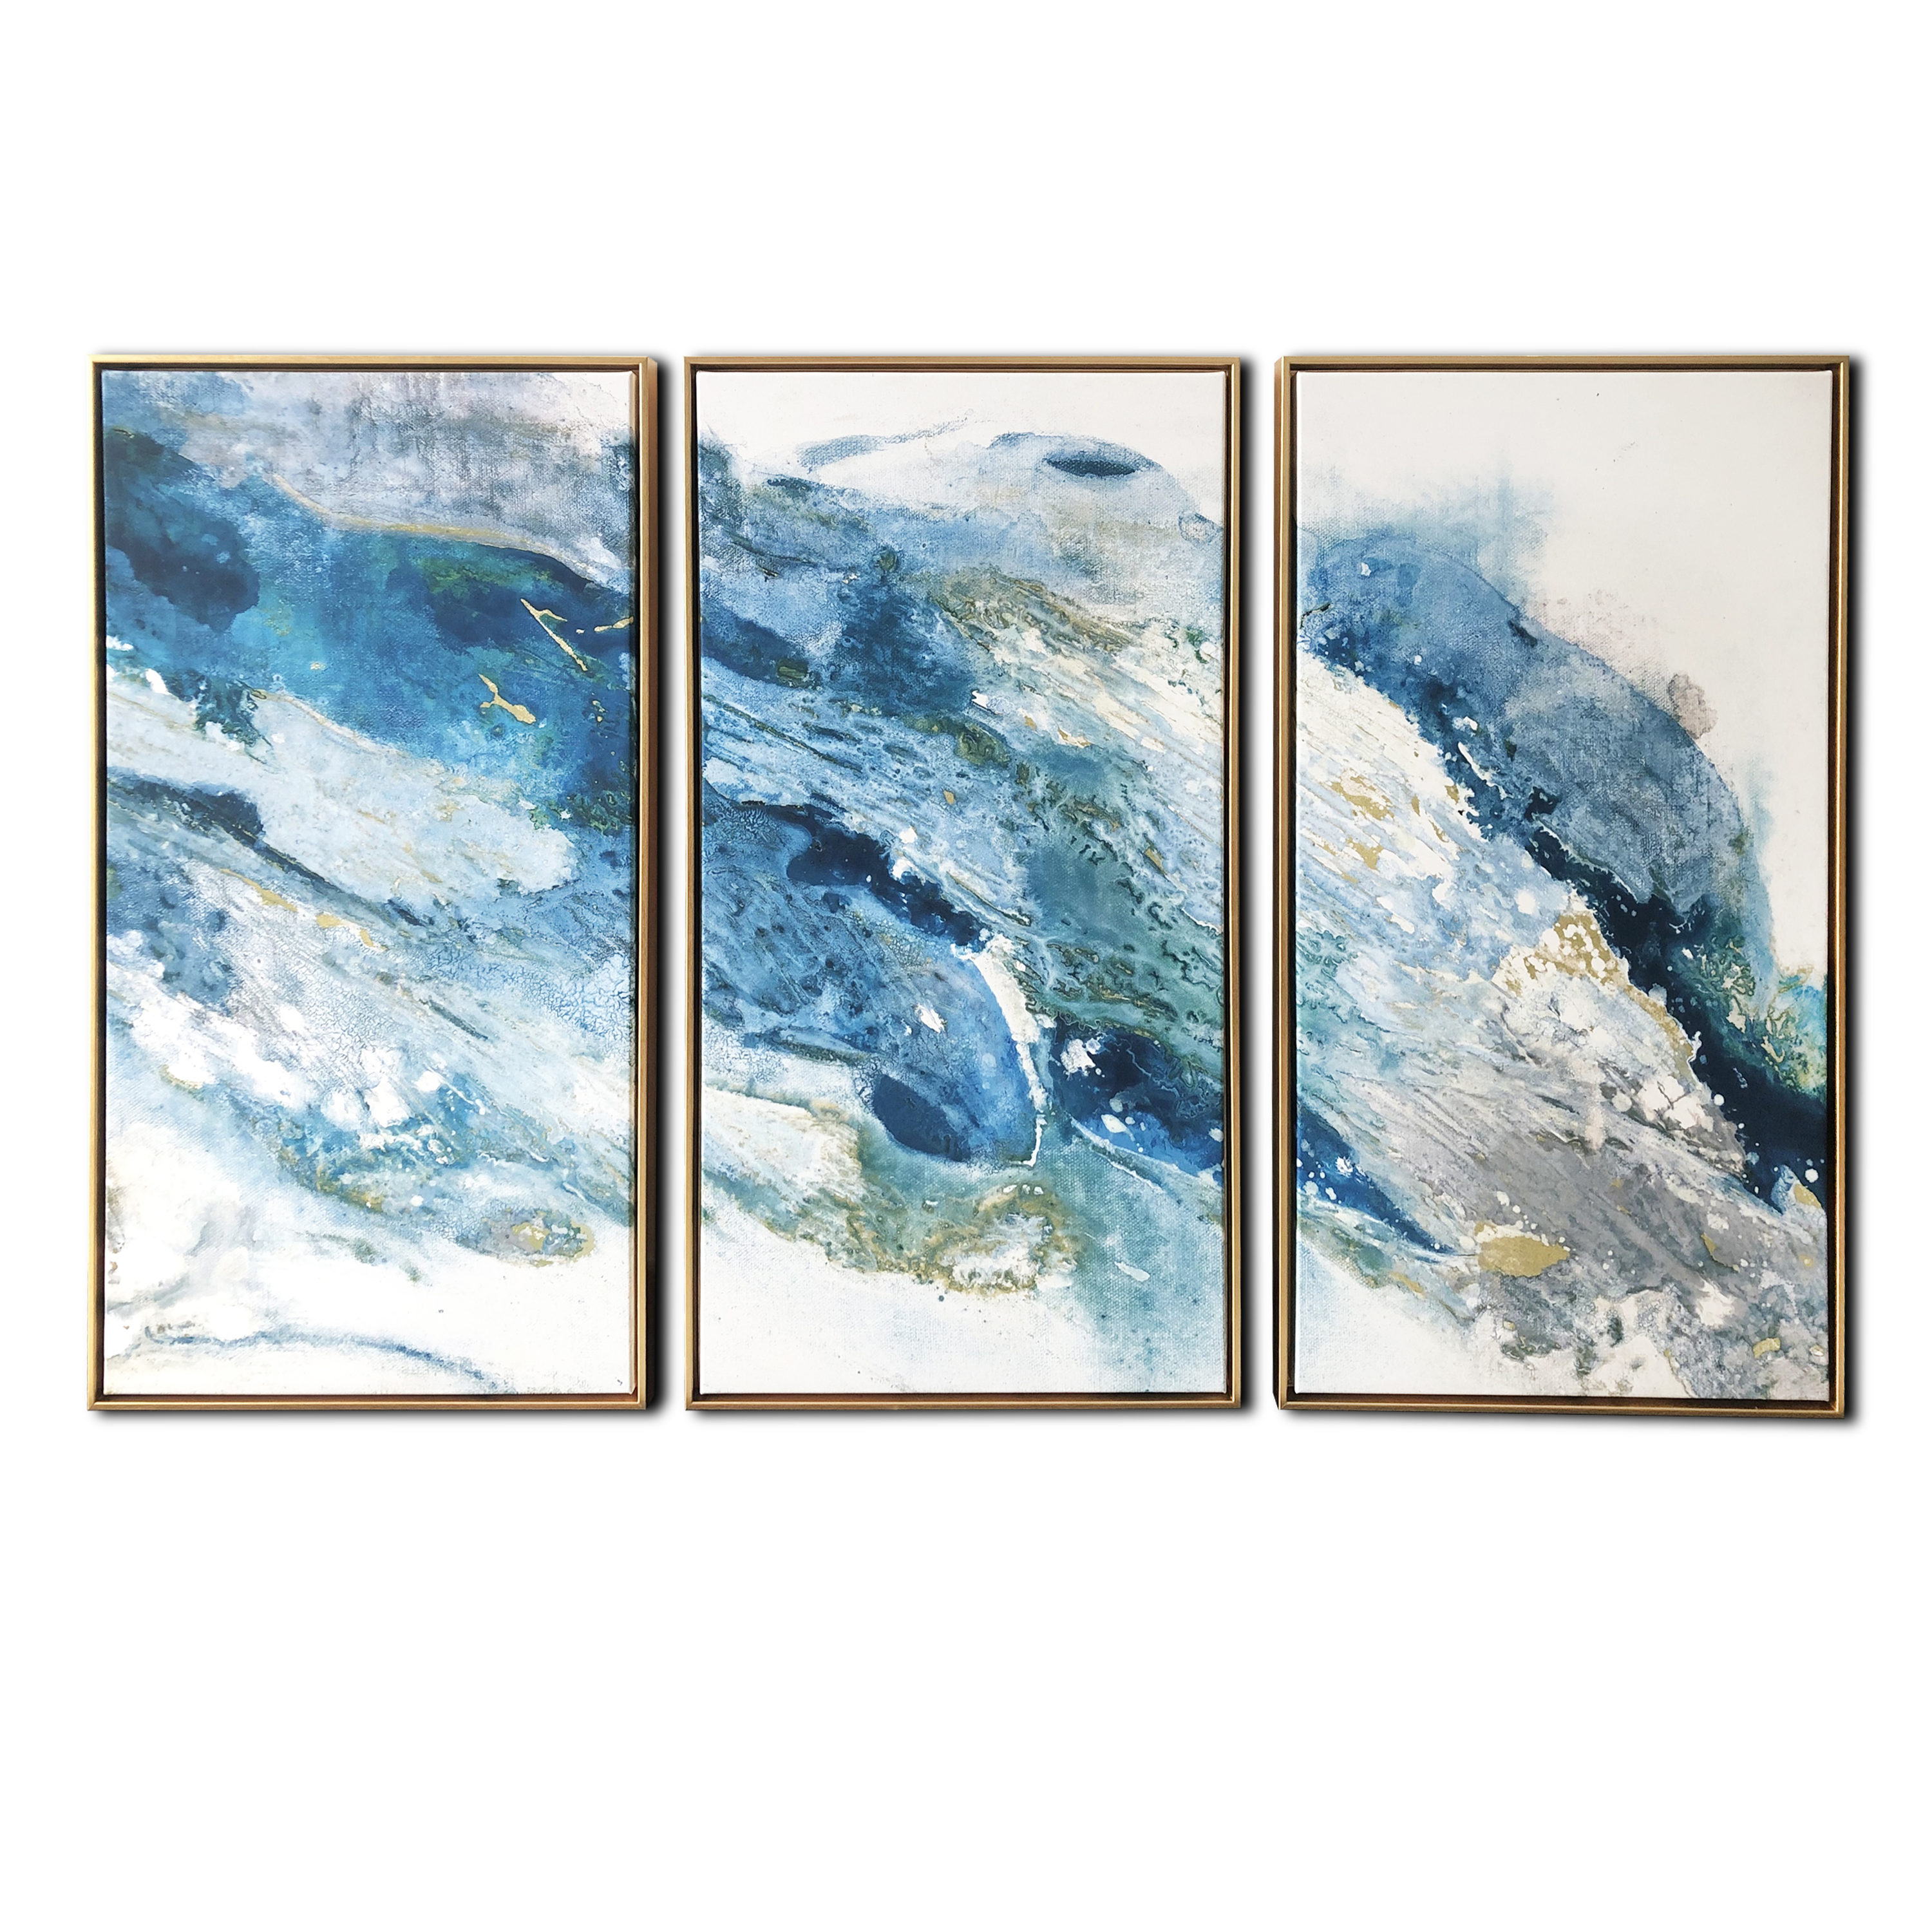 Gallery 57 Gold Floater Frame 30-in H x 48-in W Abstract Print on ...